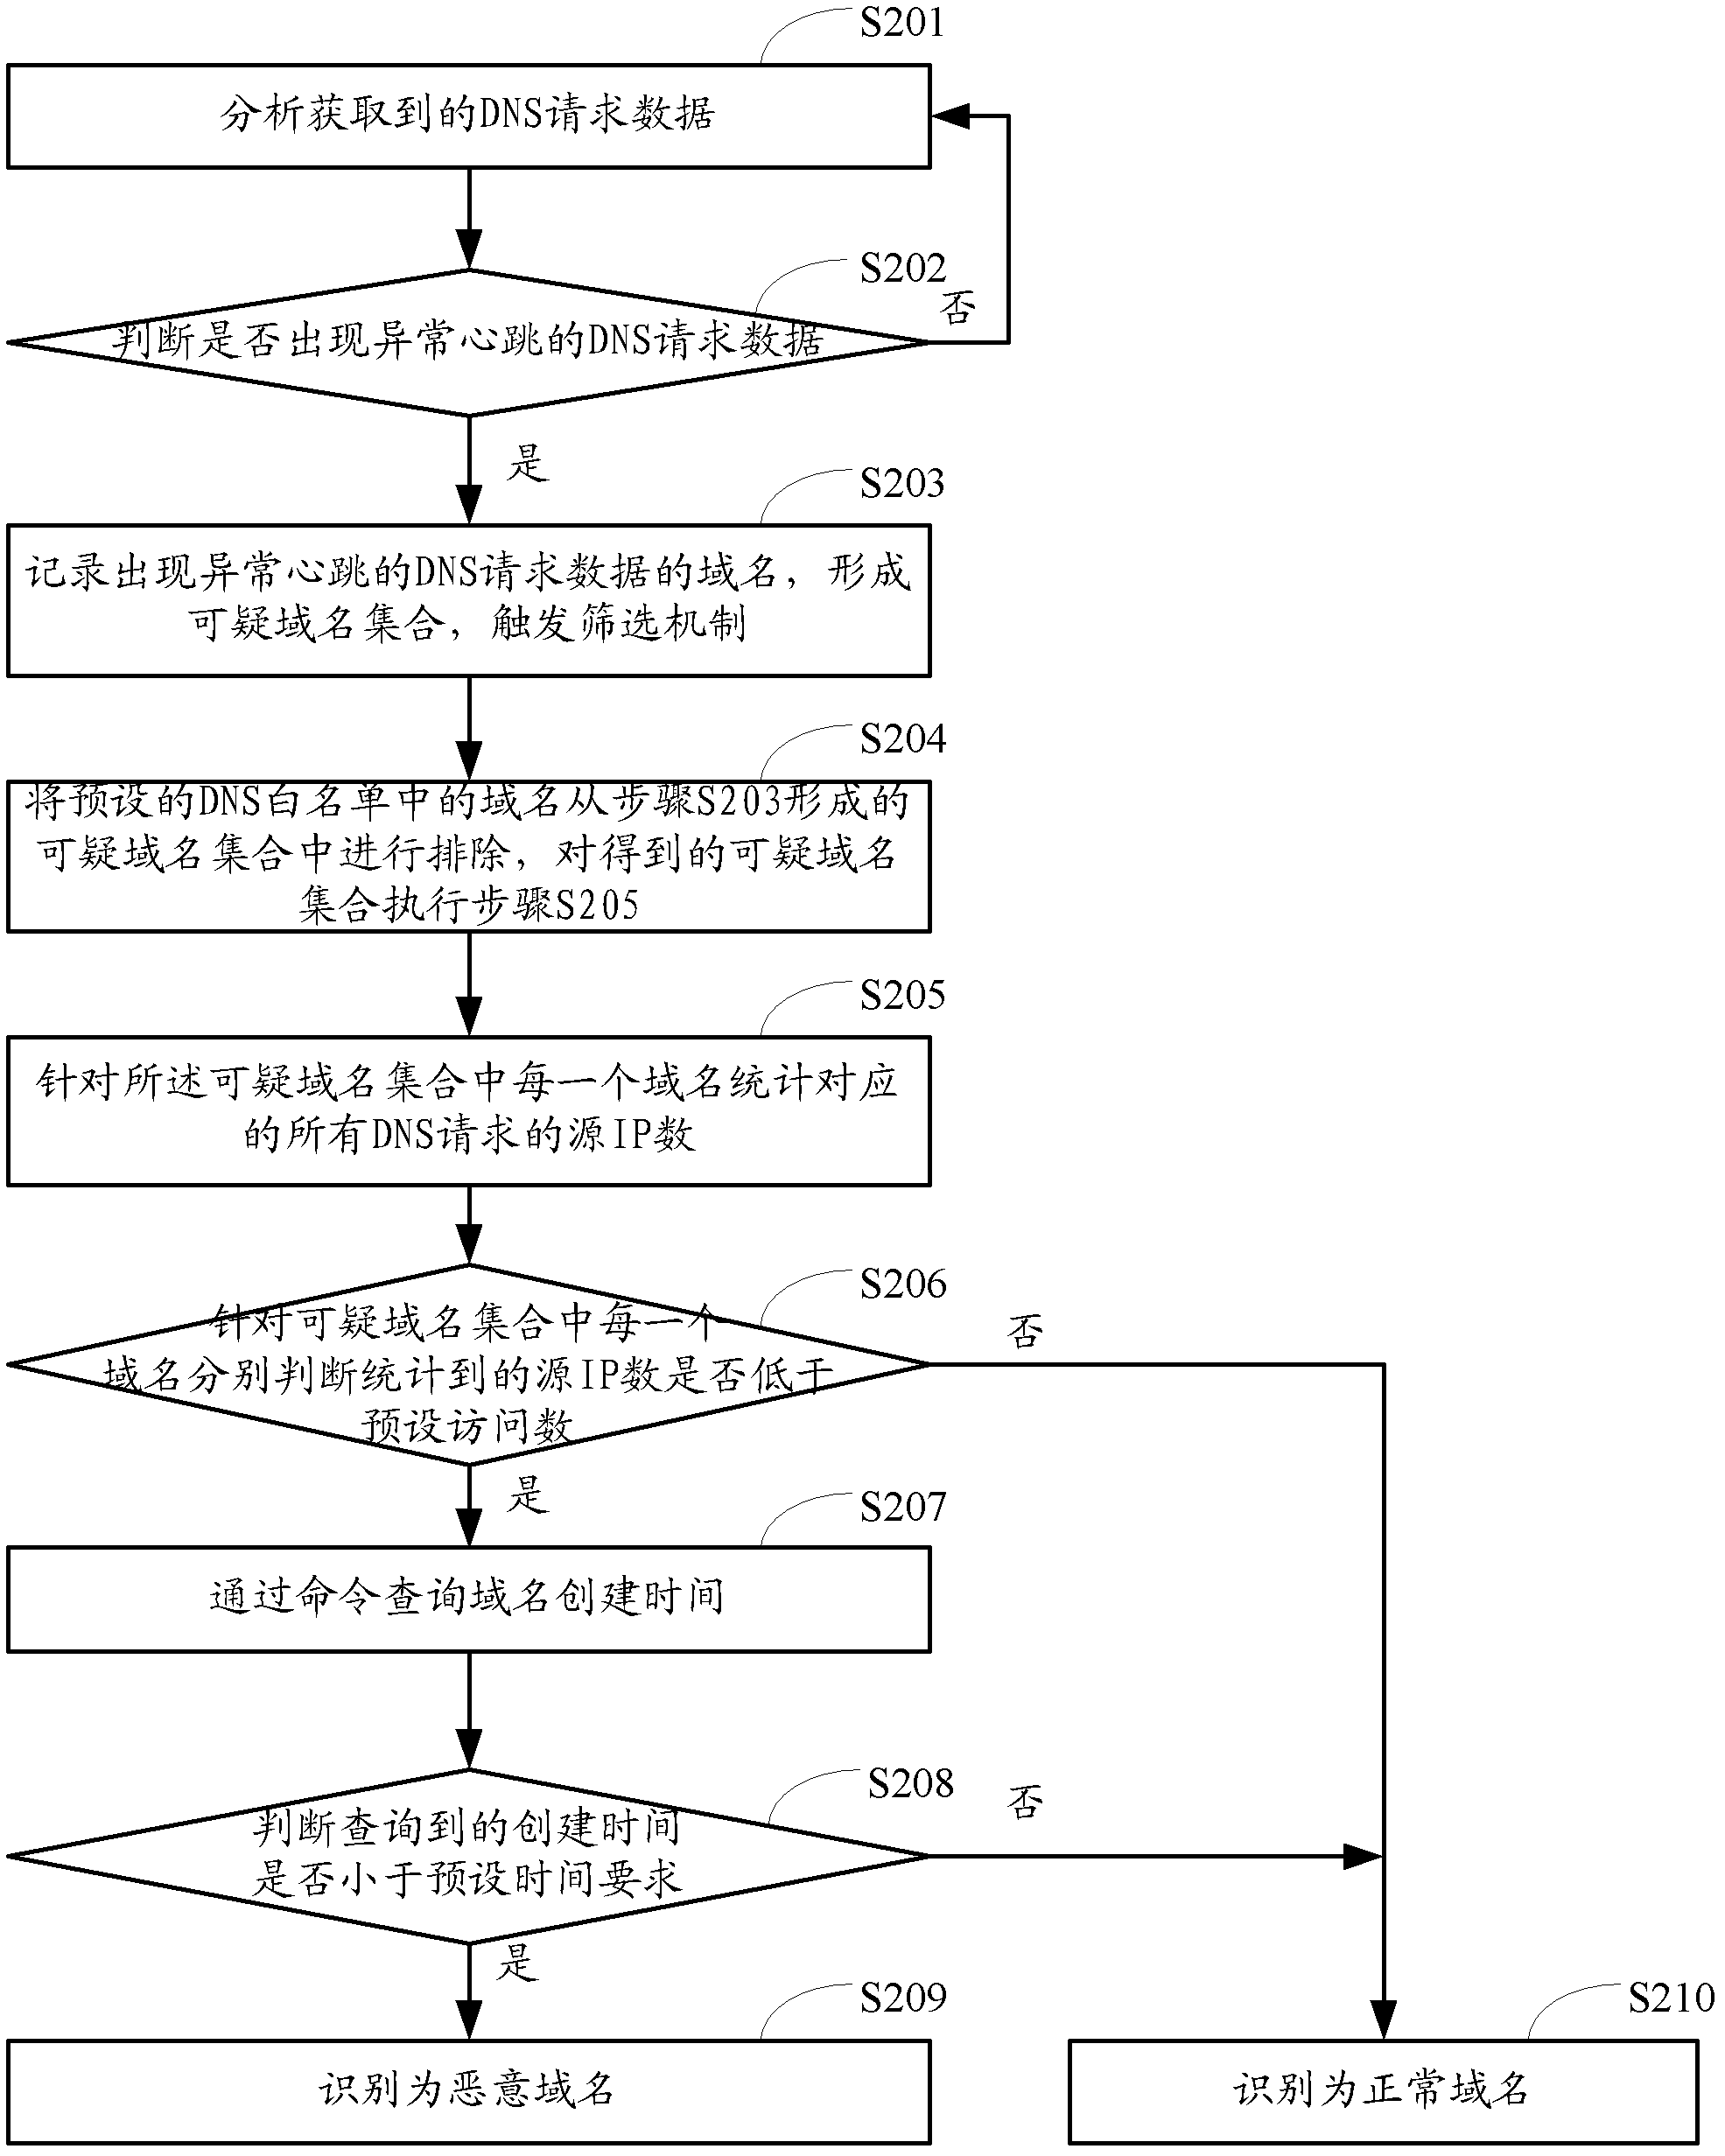 Method and device for detecting intranet Trojans